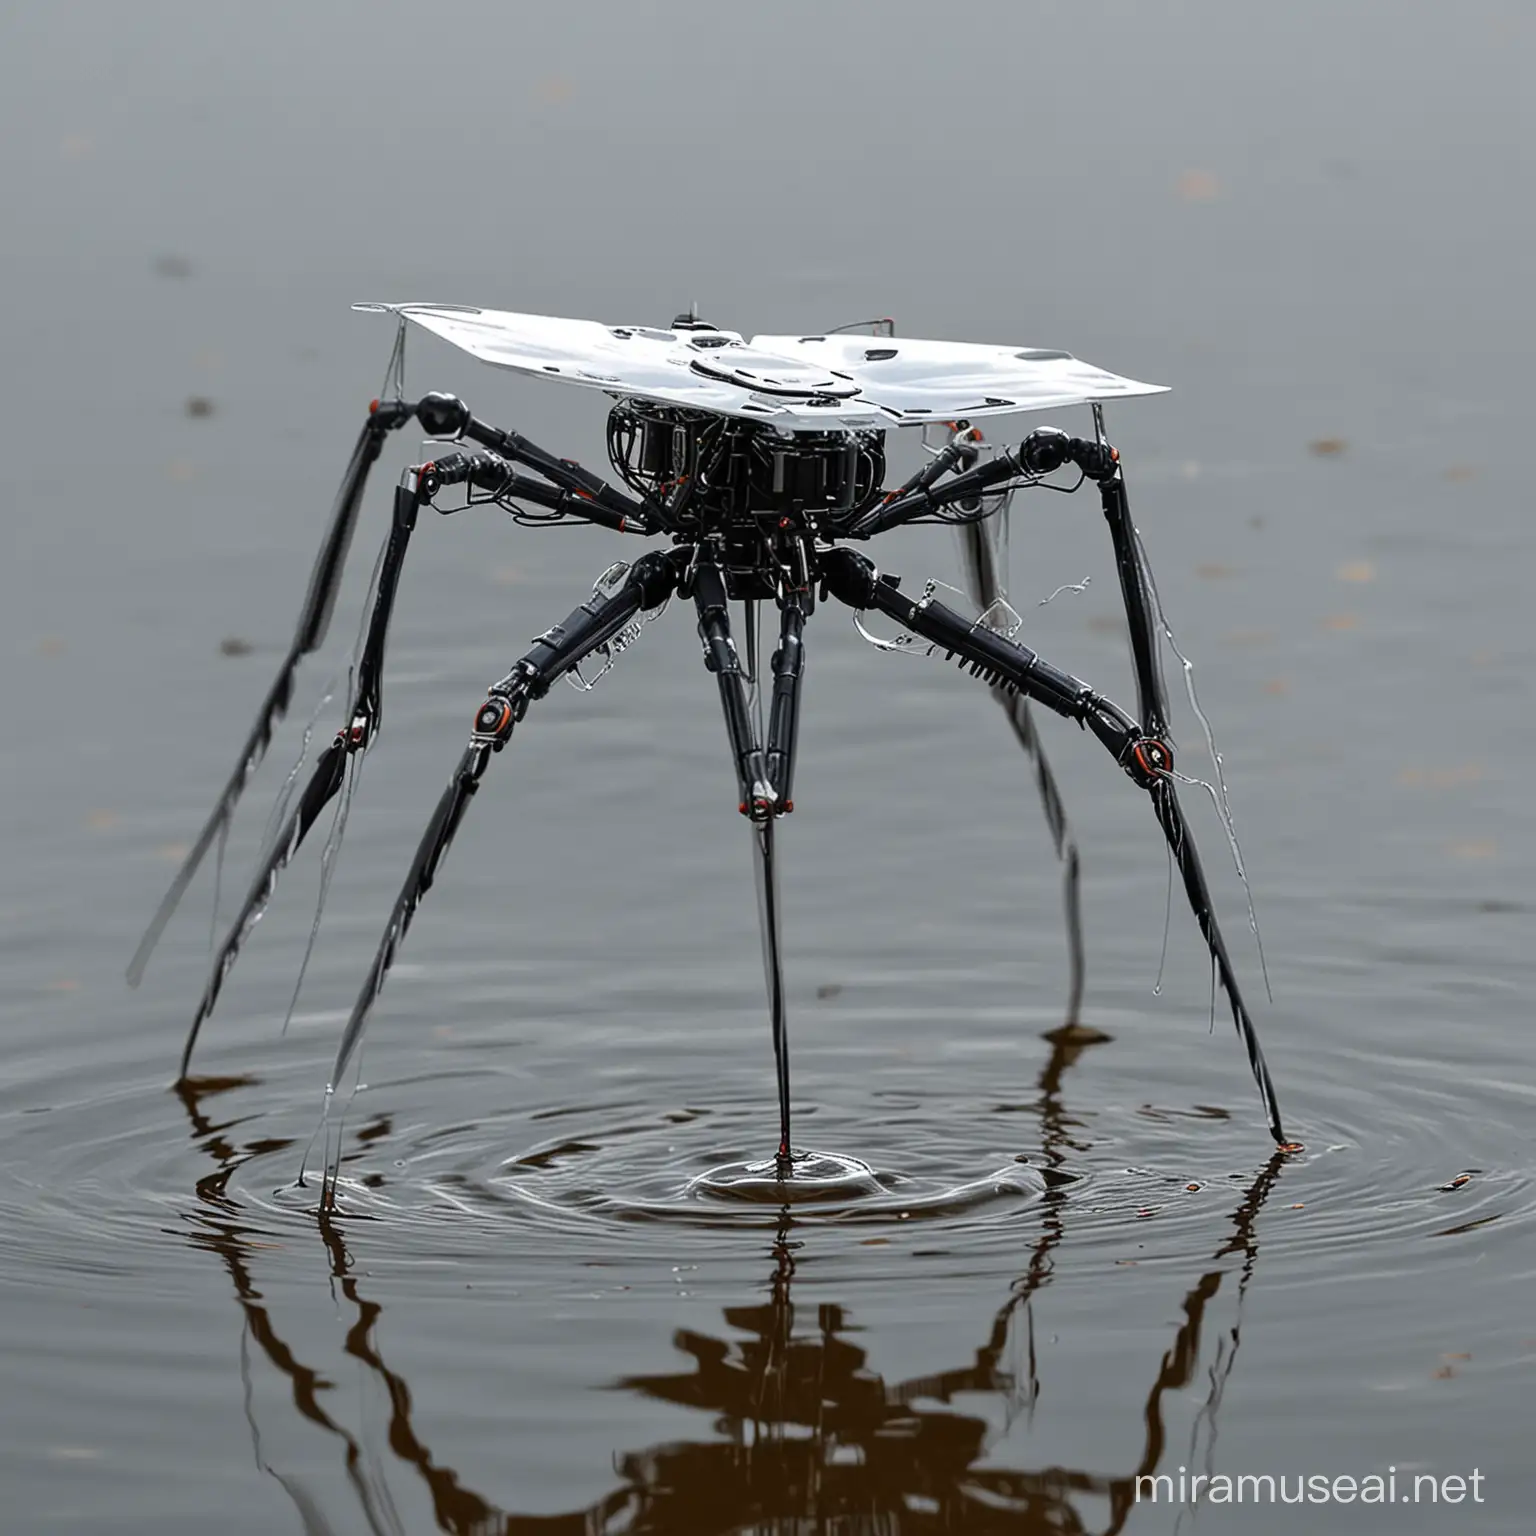 create me a picture of robotic water strider
